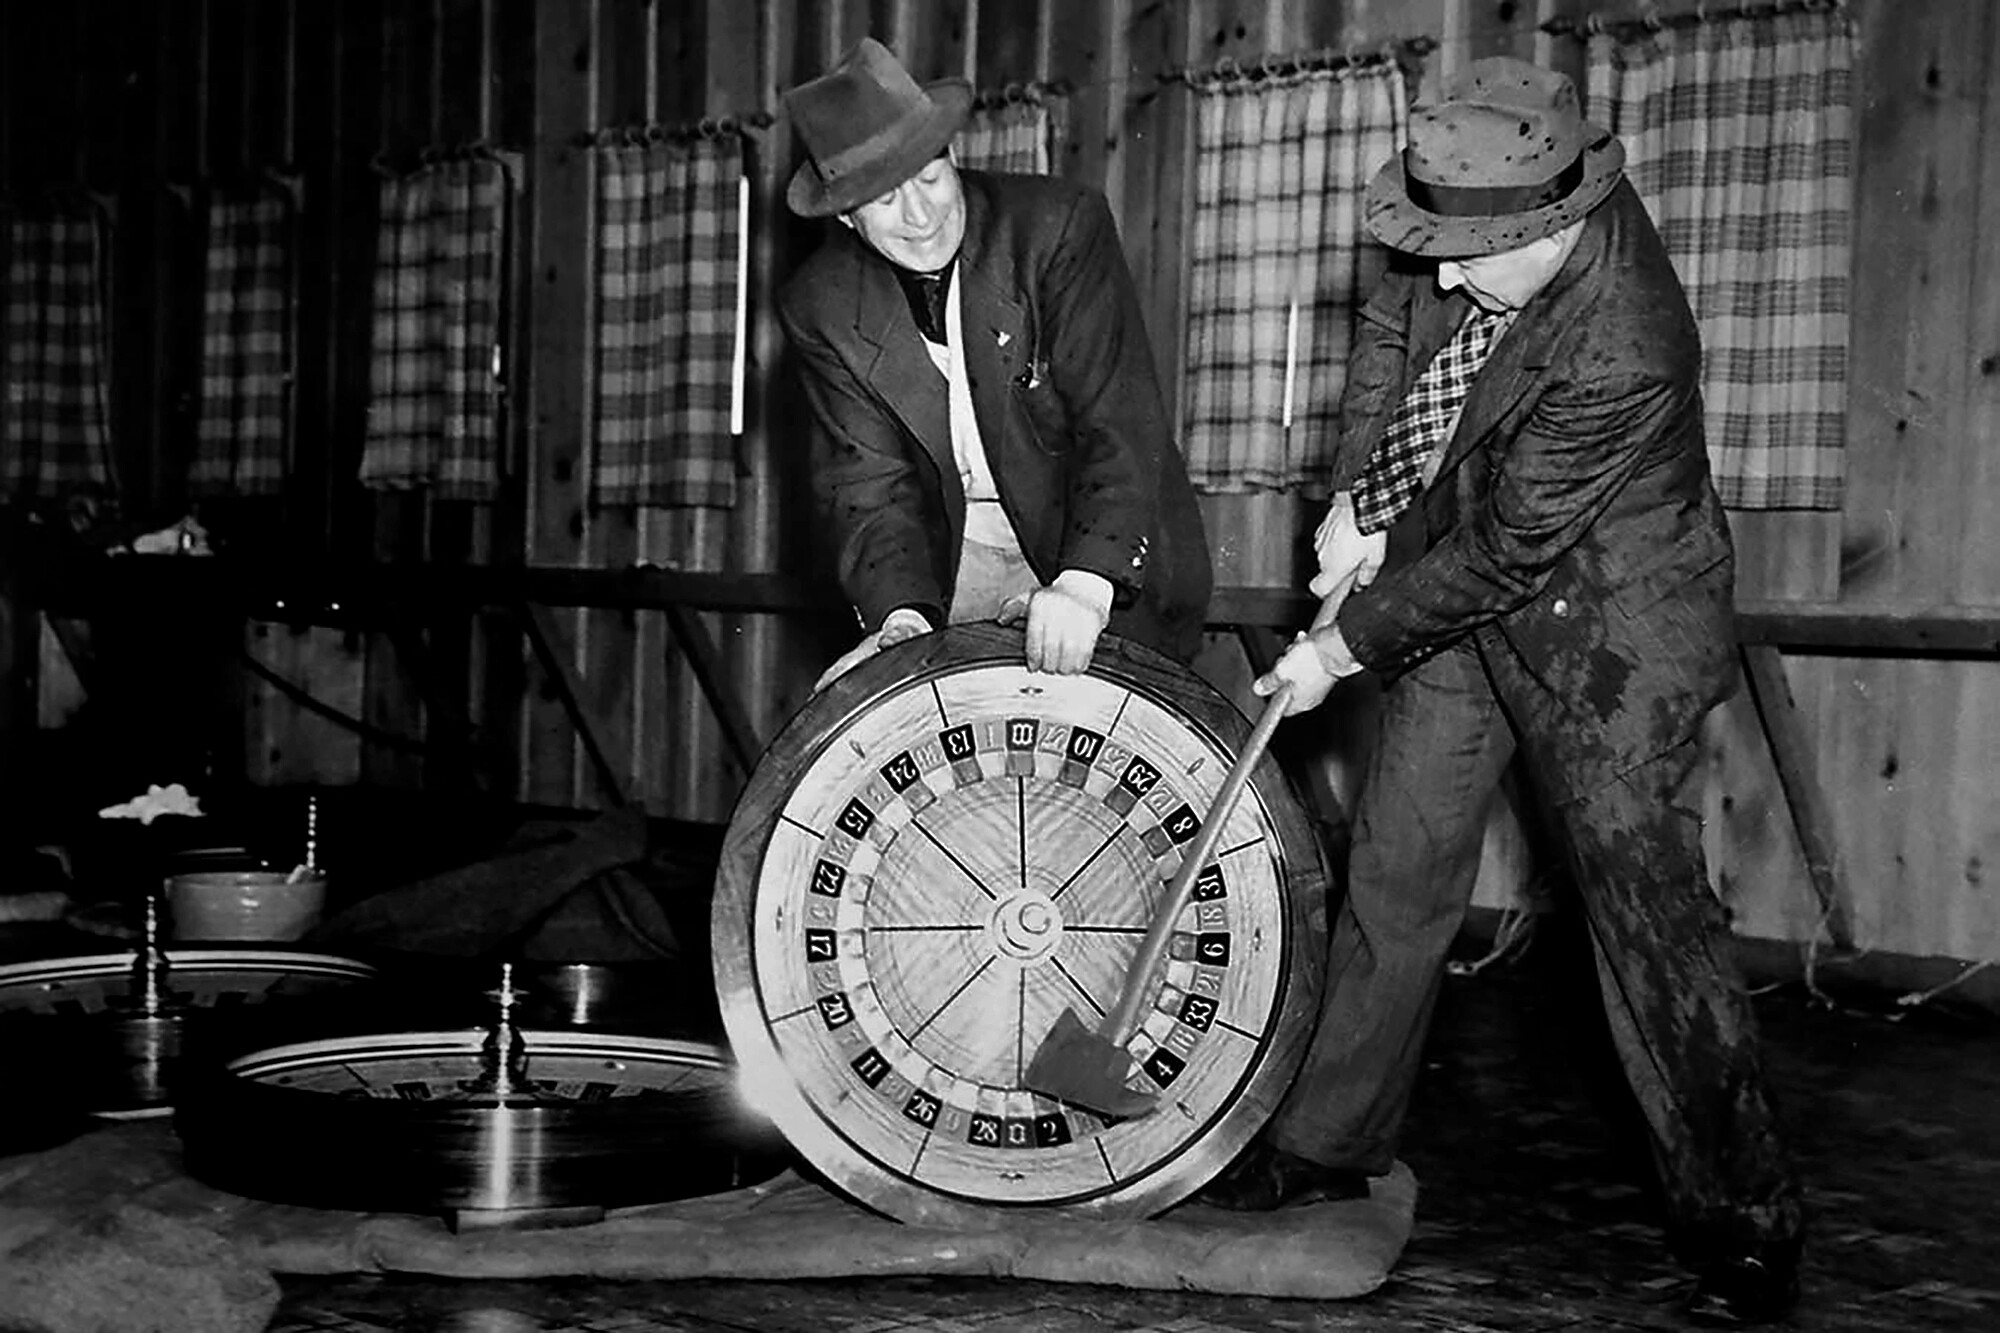 An agent in a suit and hat takes an ax to a roulette wheel held by another agent